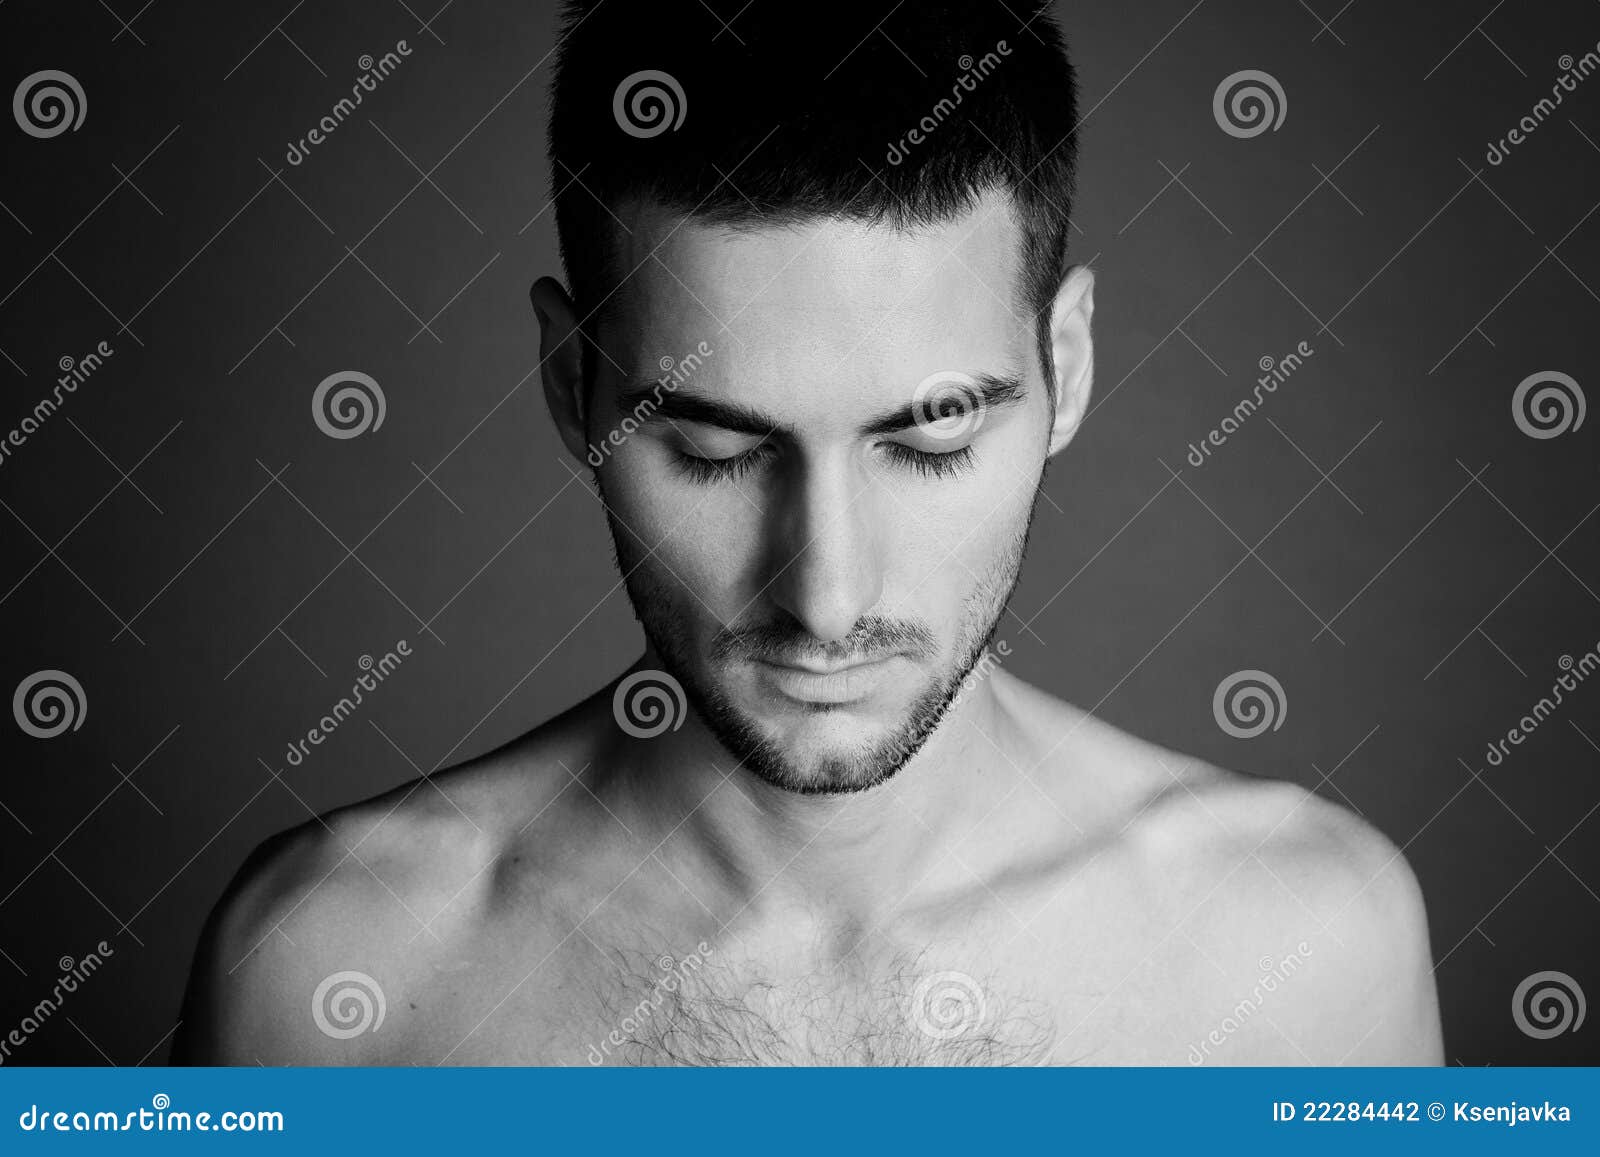 Portrait Of Young Man Looking Down Stock Photography - Image: 22284442